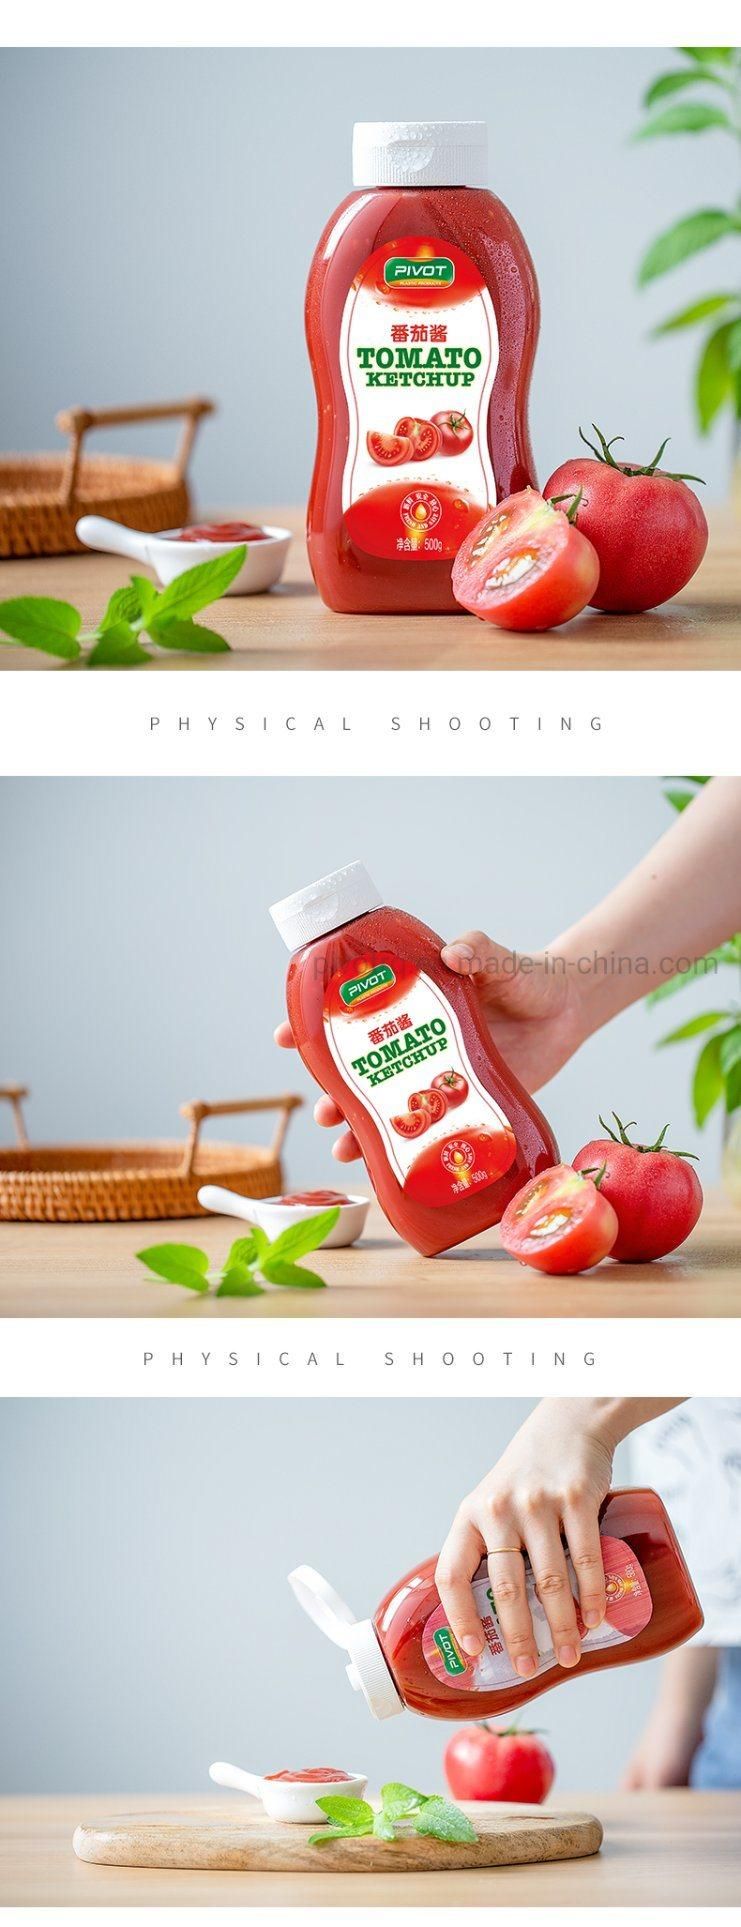 660ml Pet Plastic Sauce Bottle with Silicone Valve Caps for Packing Sauce Ketchup